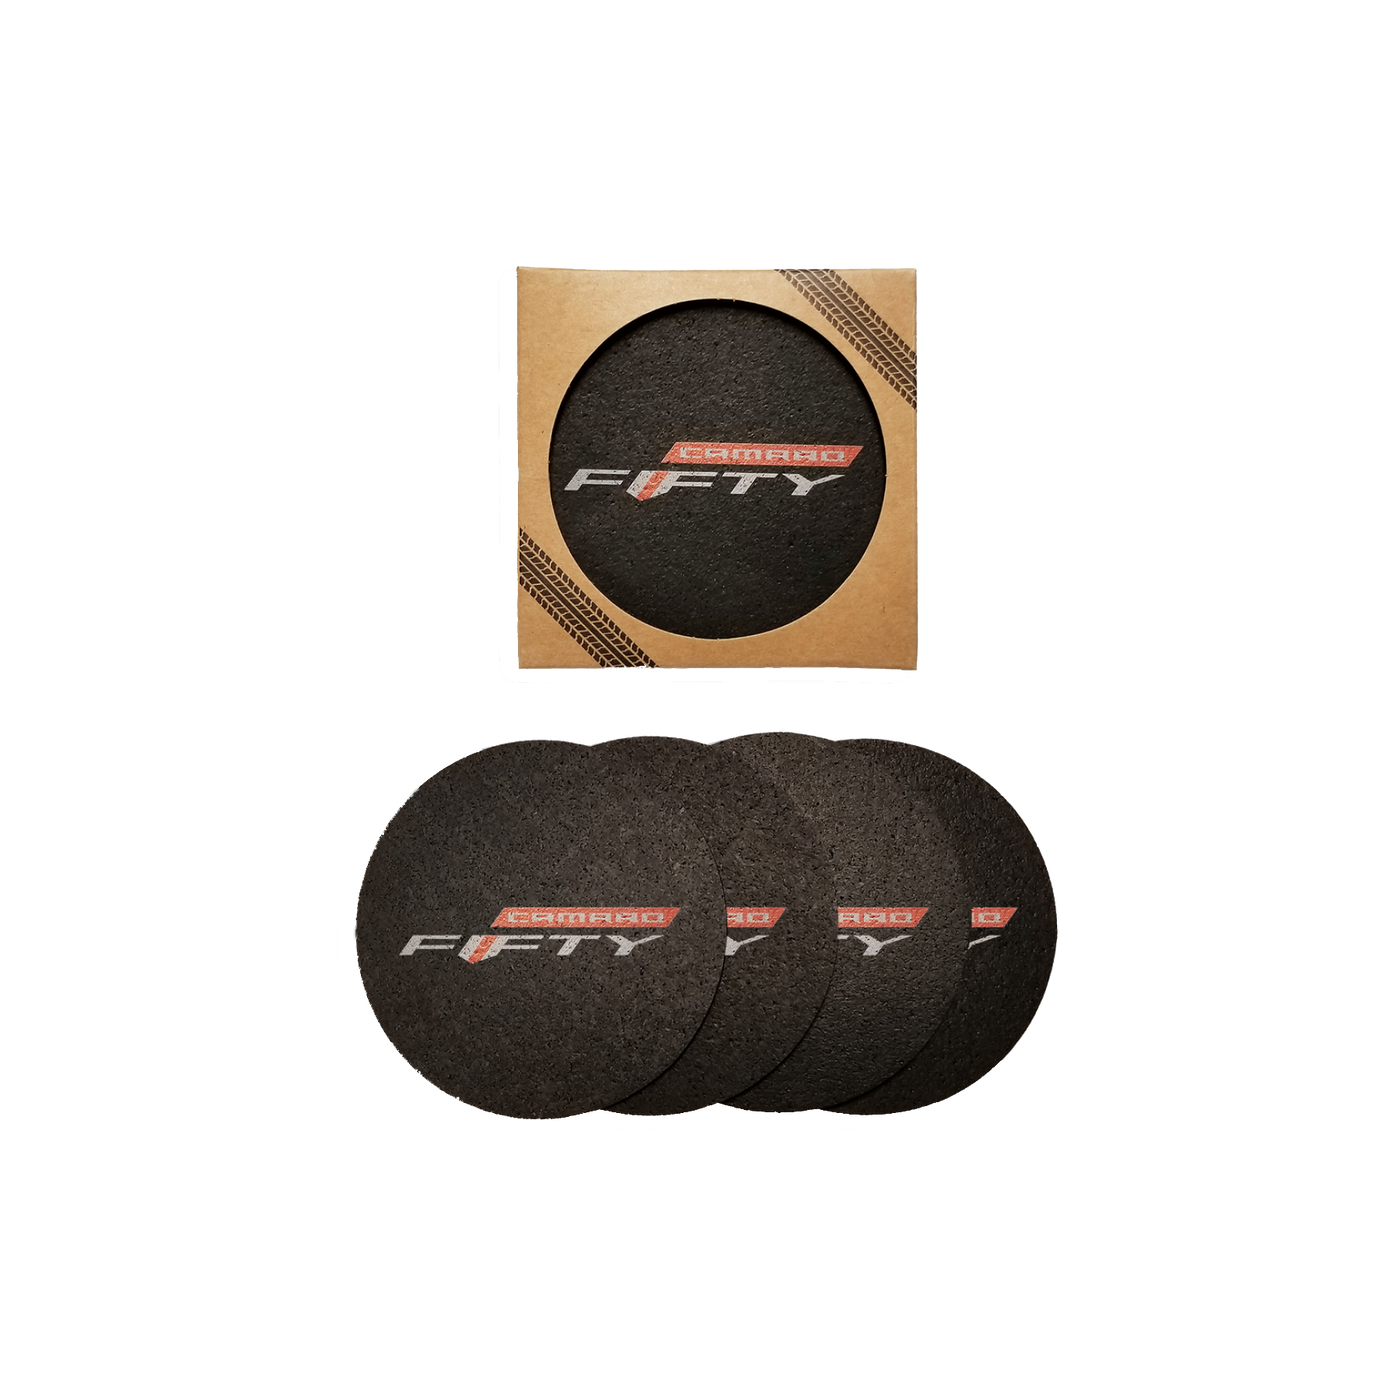 Camaro Fifty Recycled Rubber Tire (4 Pack) Coaster Set *Made In The USA